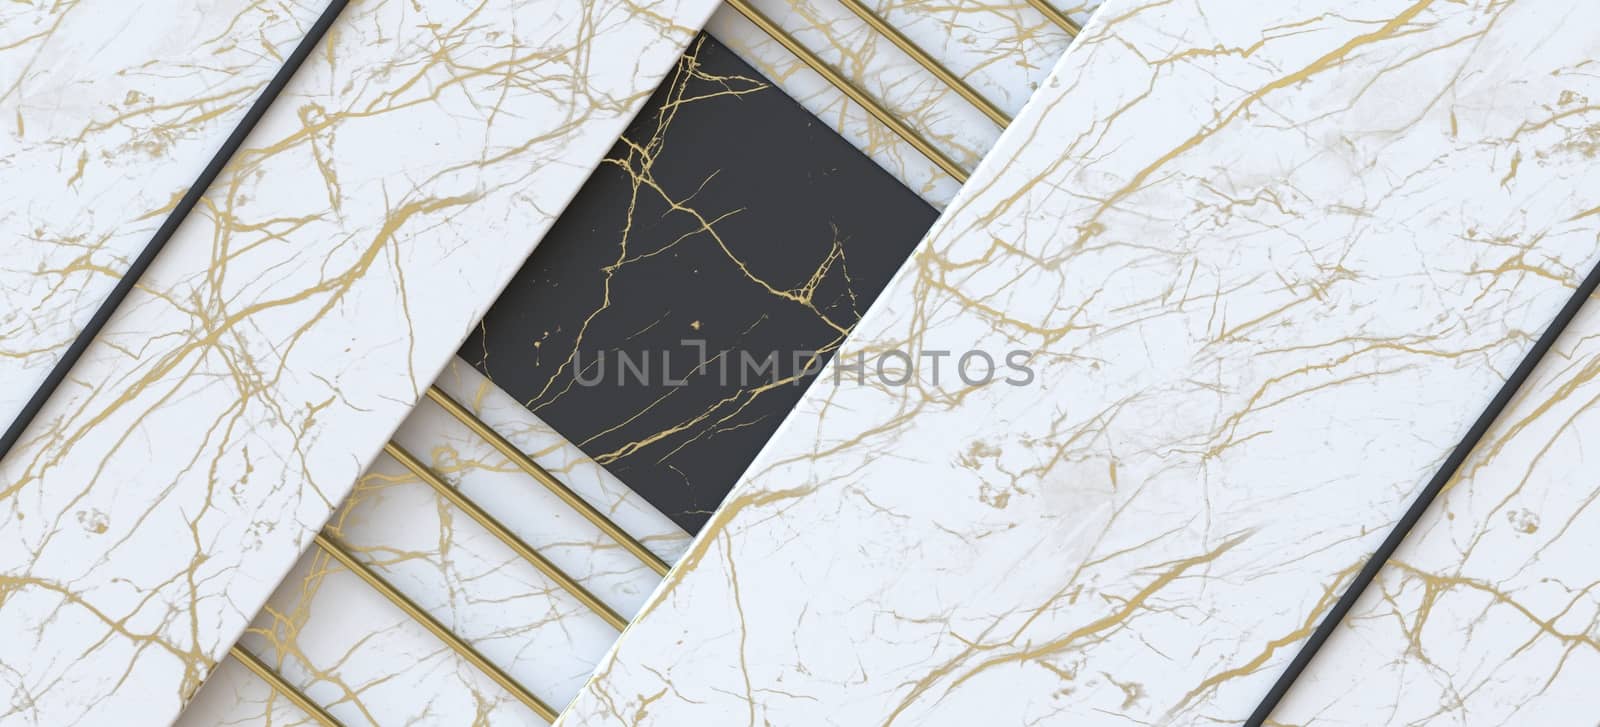 Abstract background made of white marbles 3D render illustration on black background